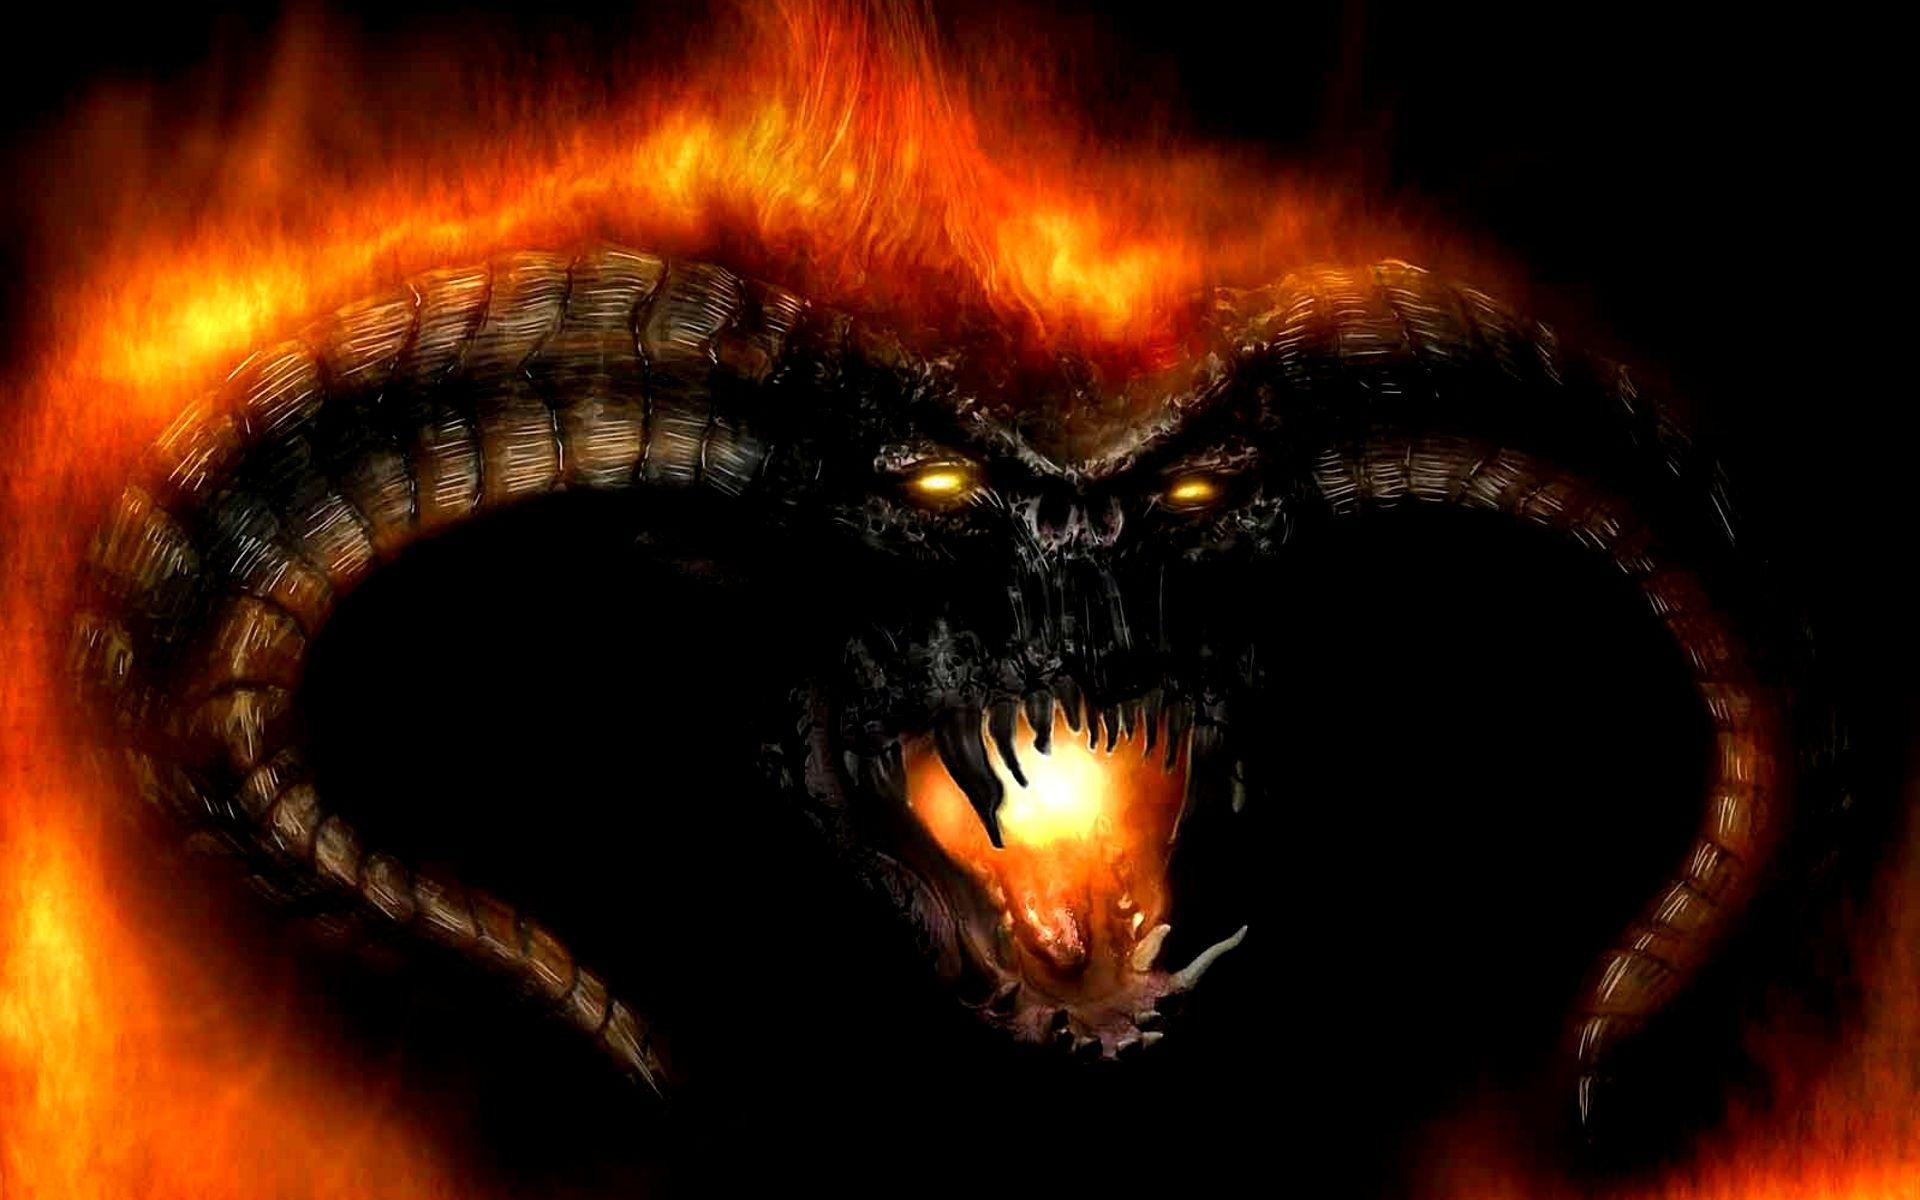 He was taken by both shadow and flame. a Balrog of Morgoth